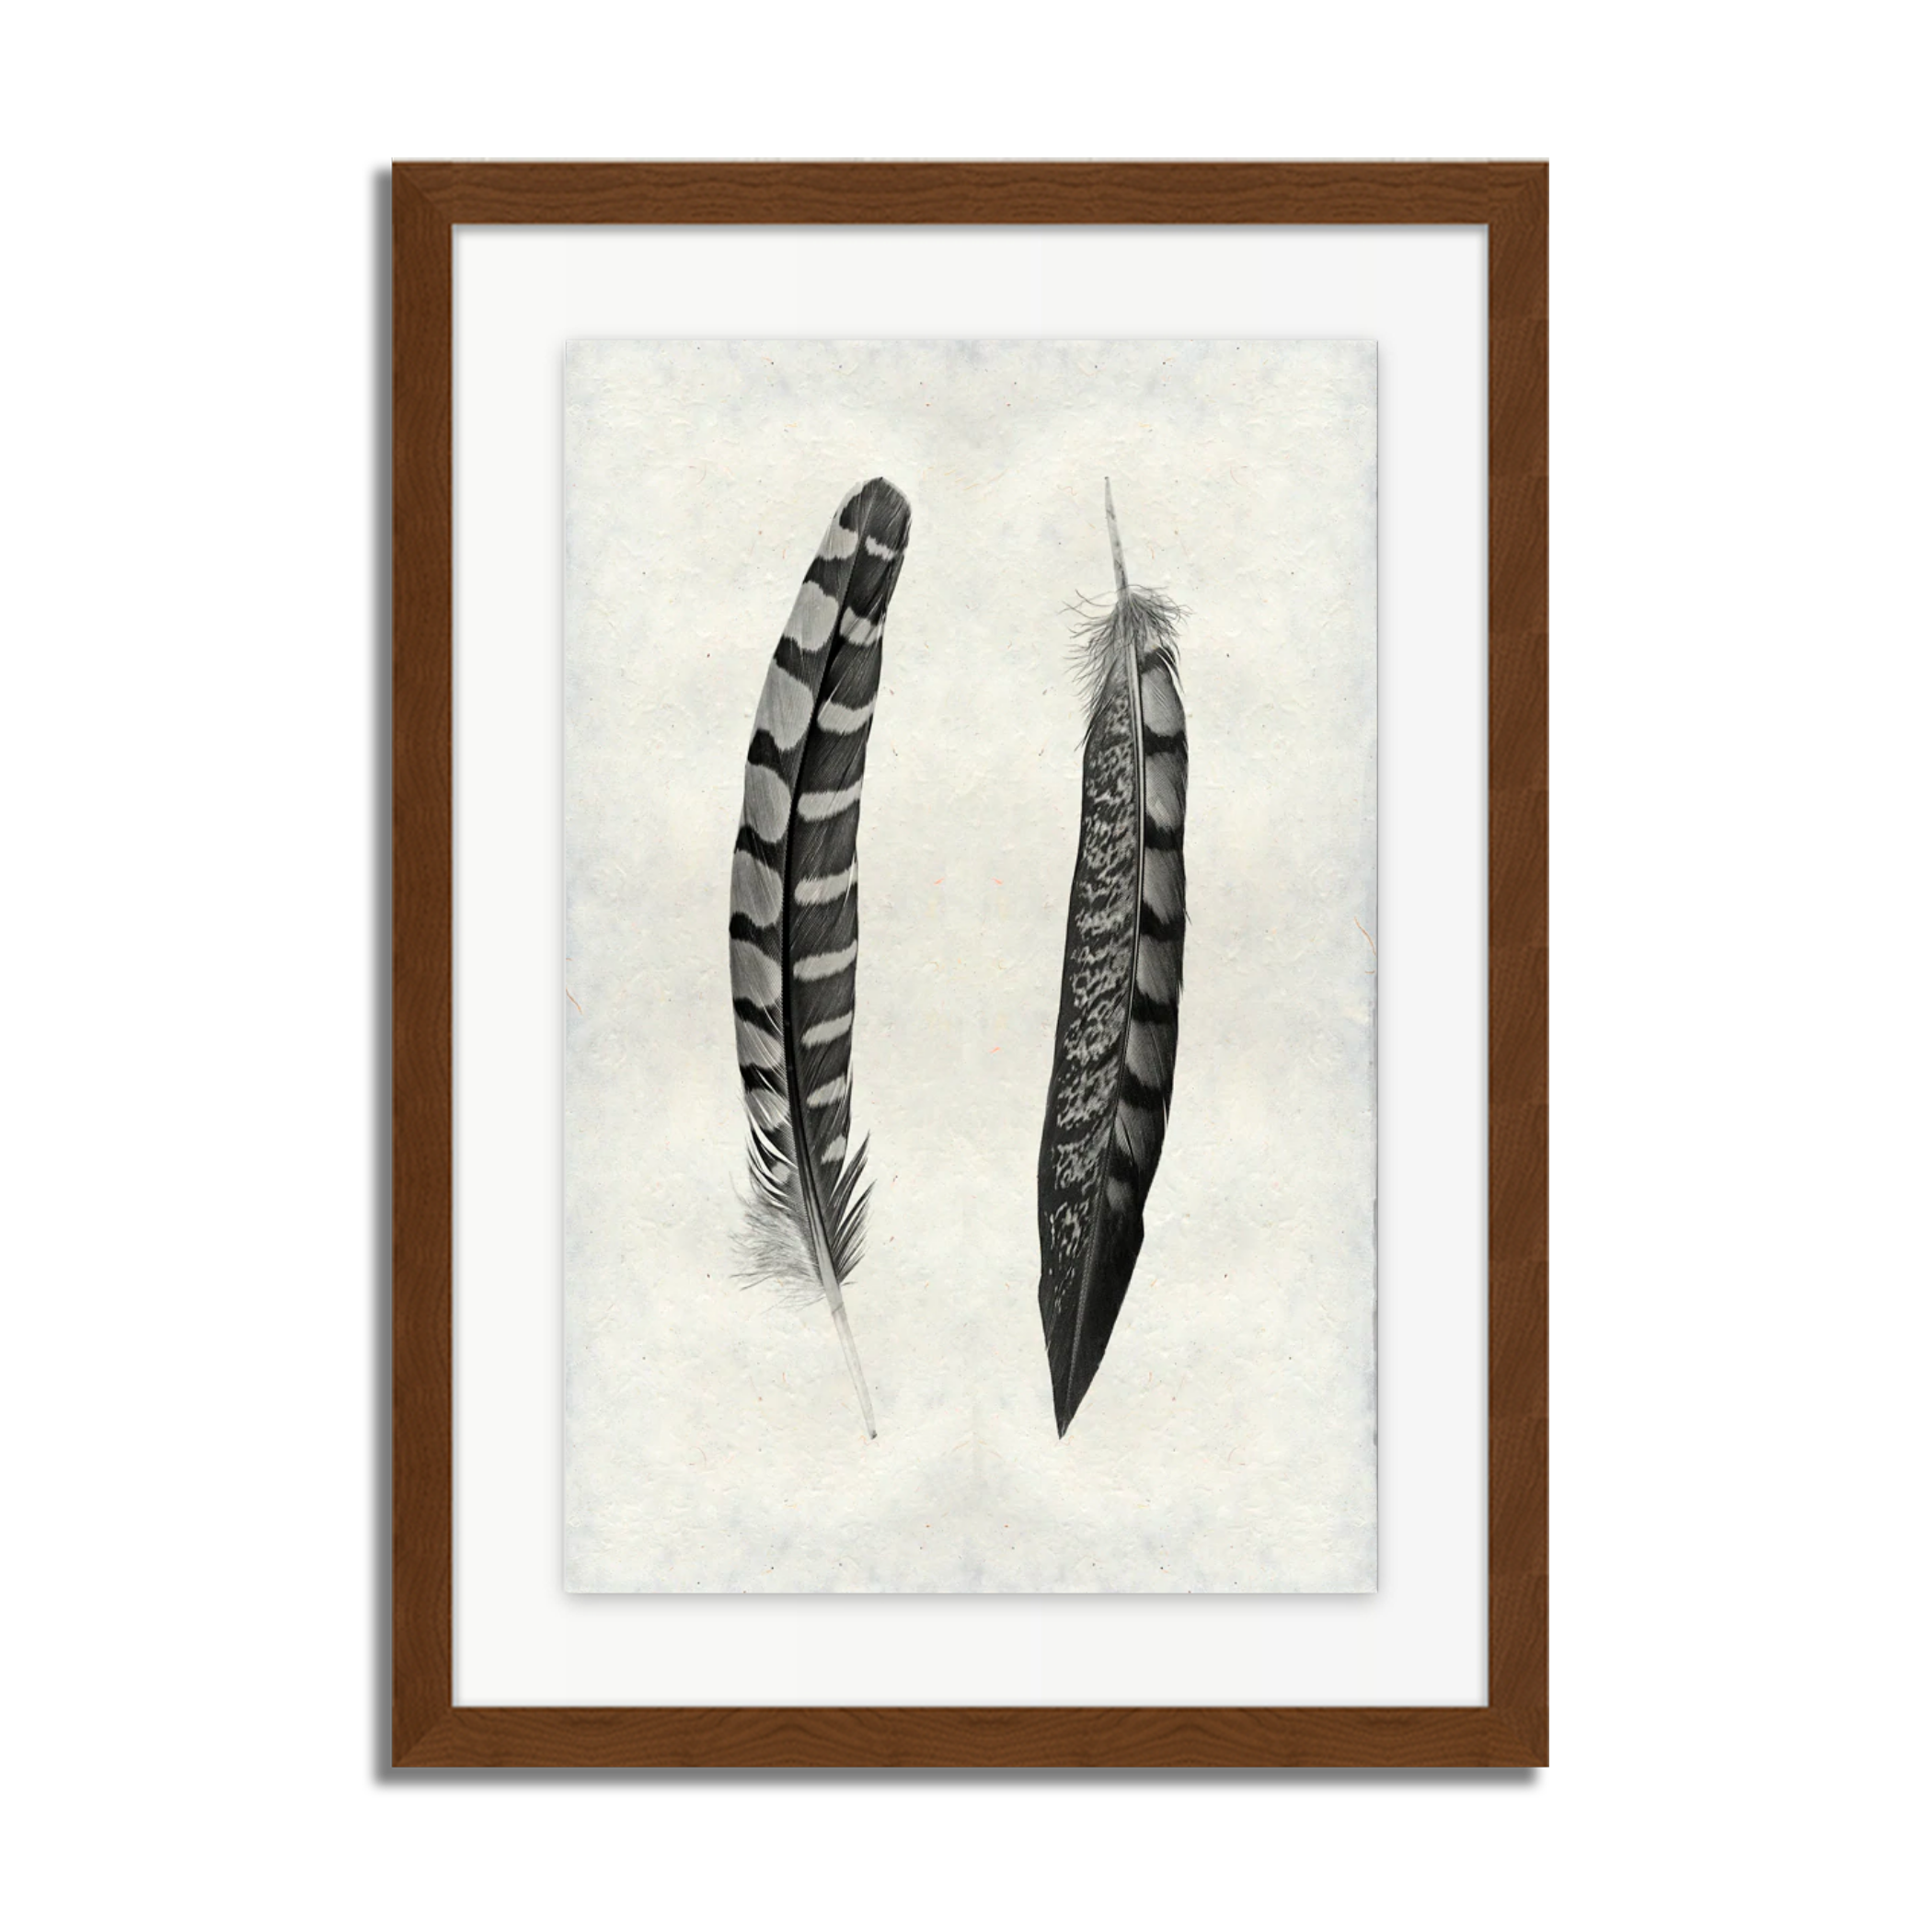 2 Curved Feathers (Partridge Wing & Pheasant Tail)